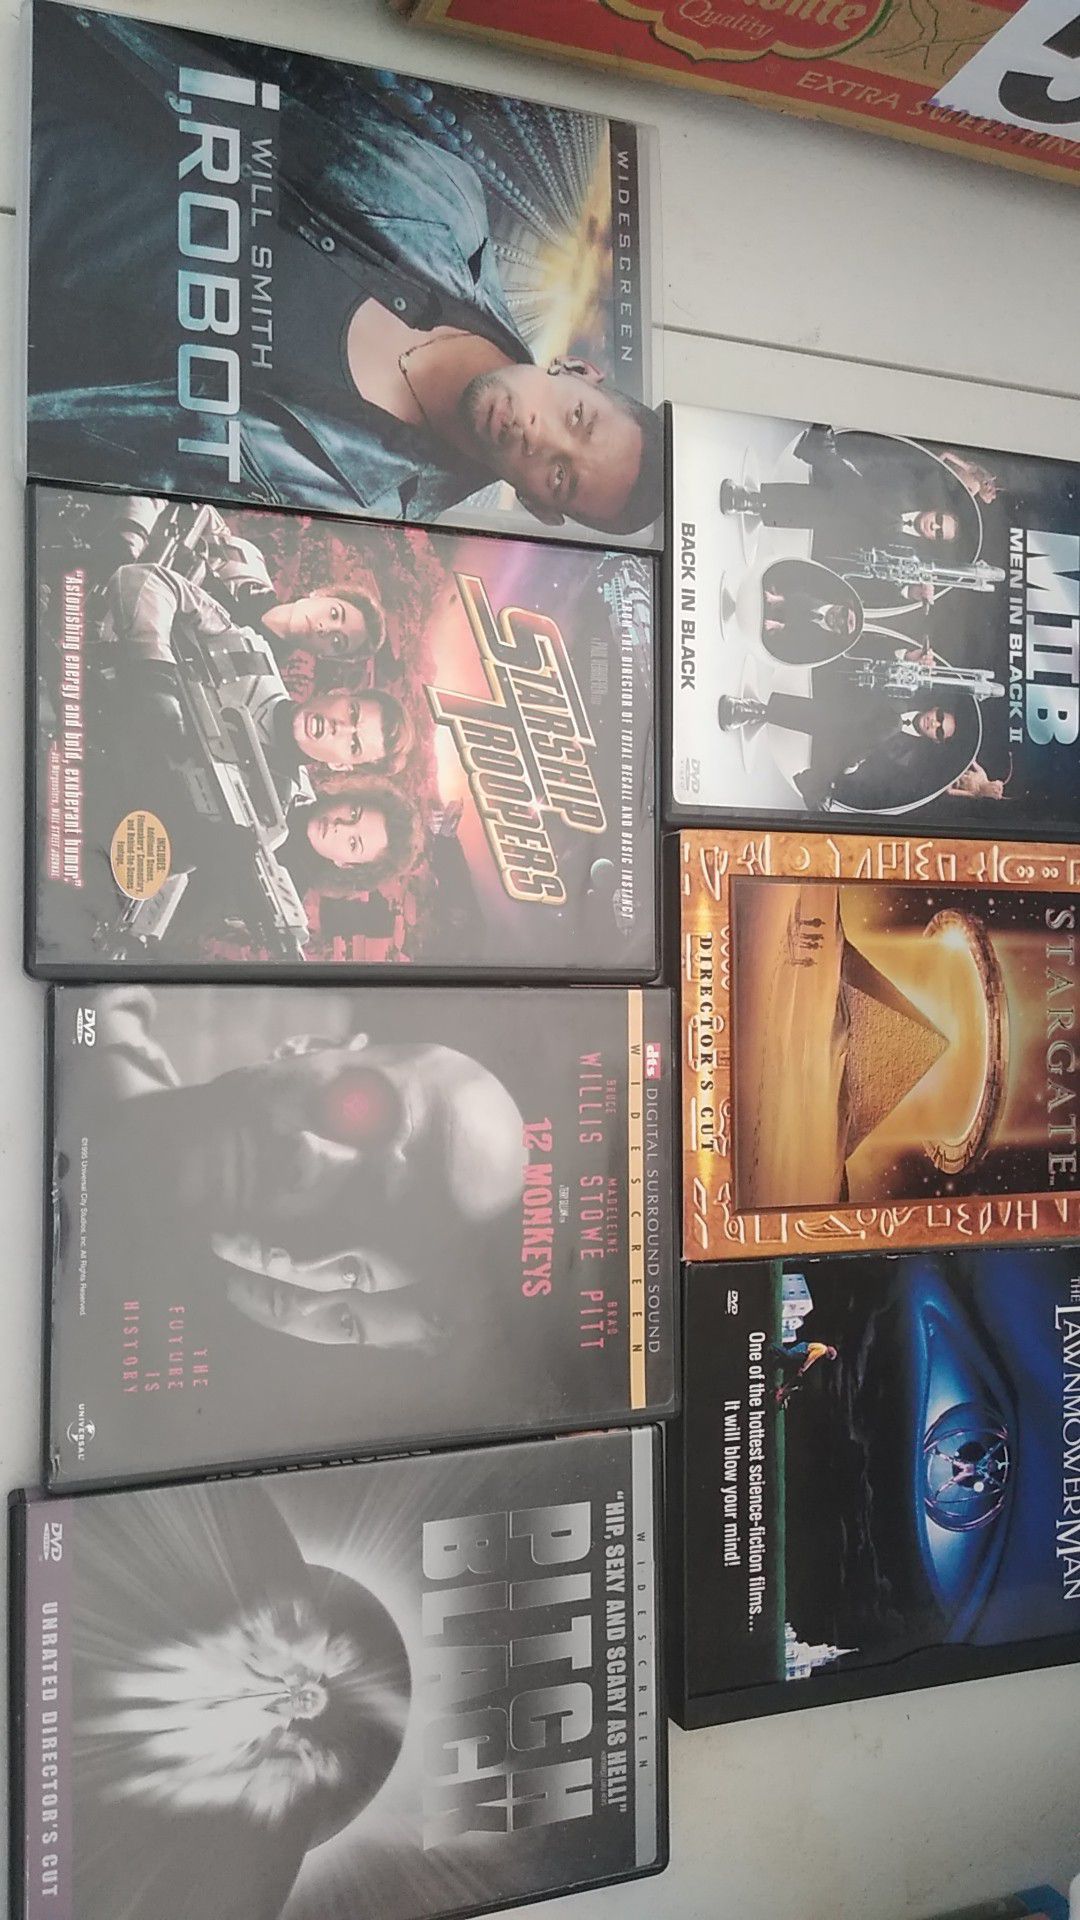 Lot of 7 Sci-Fi Dvds